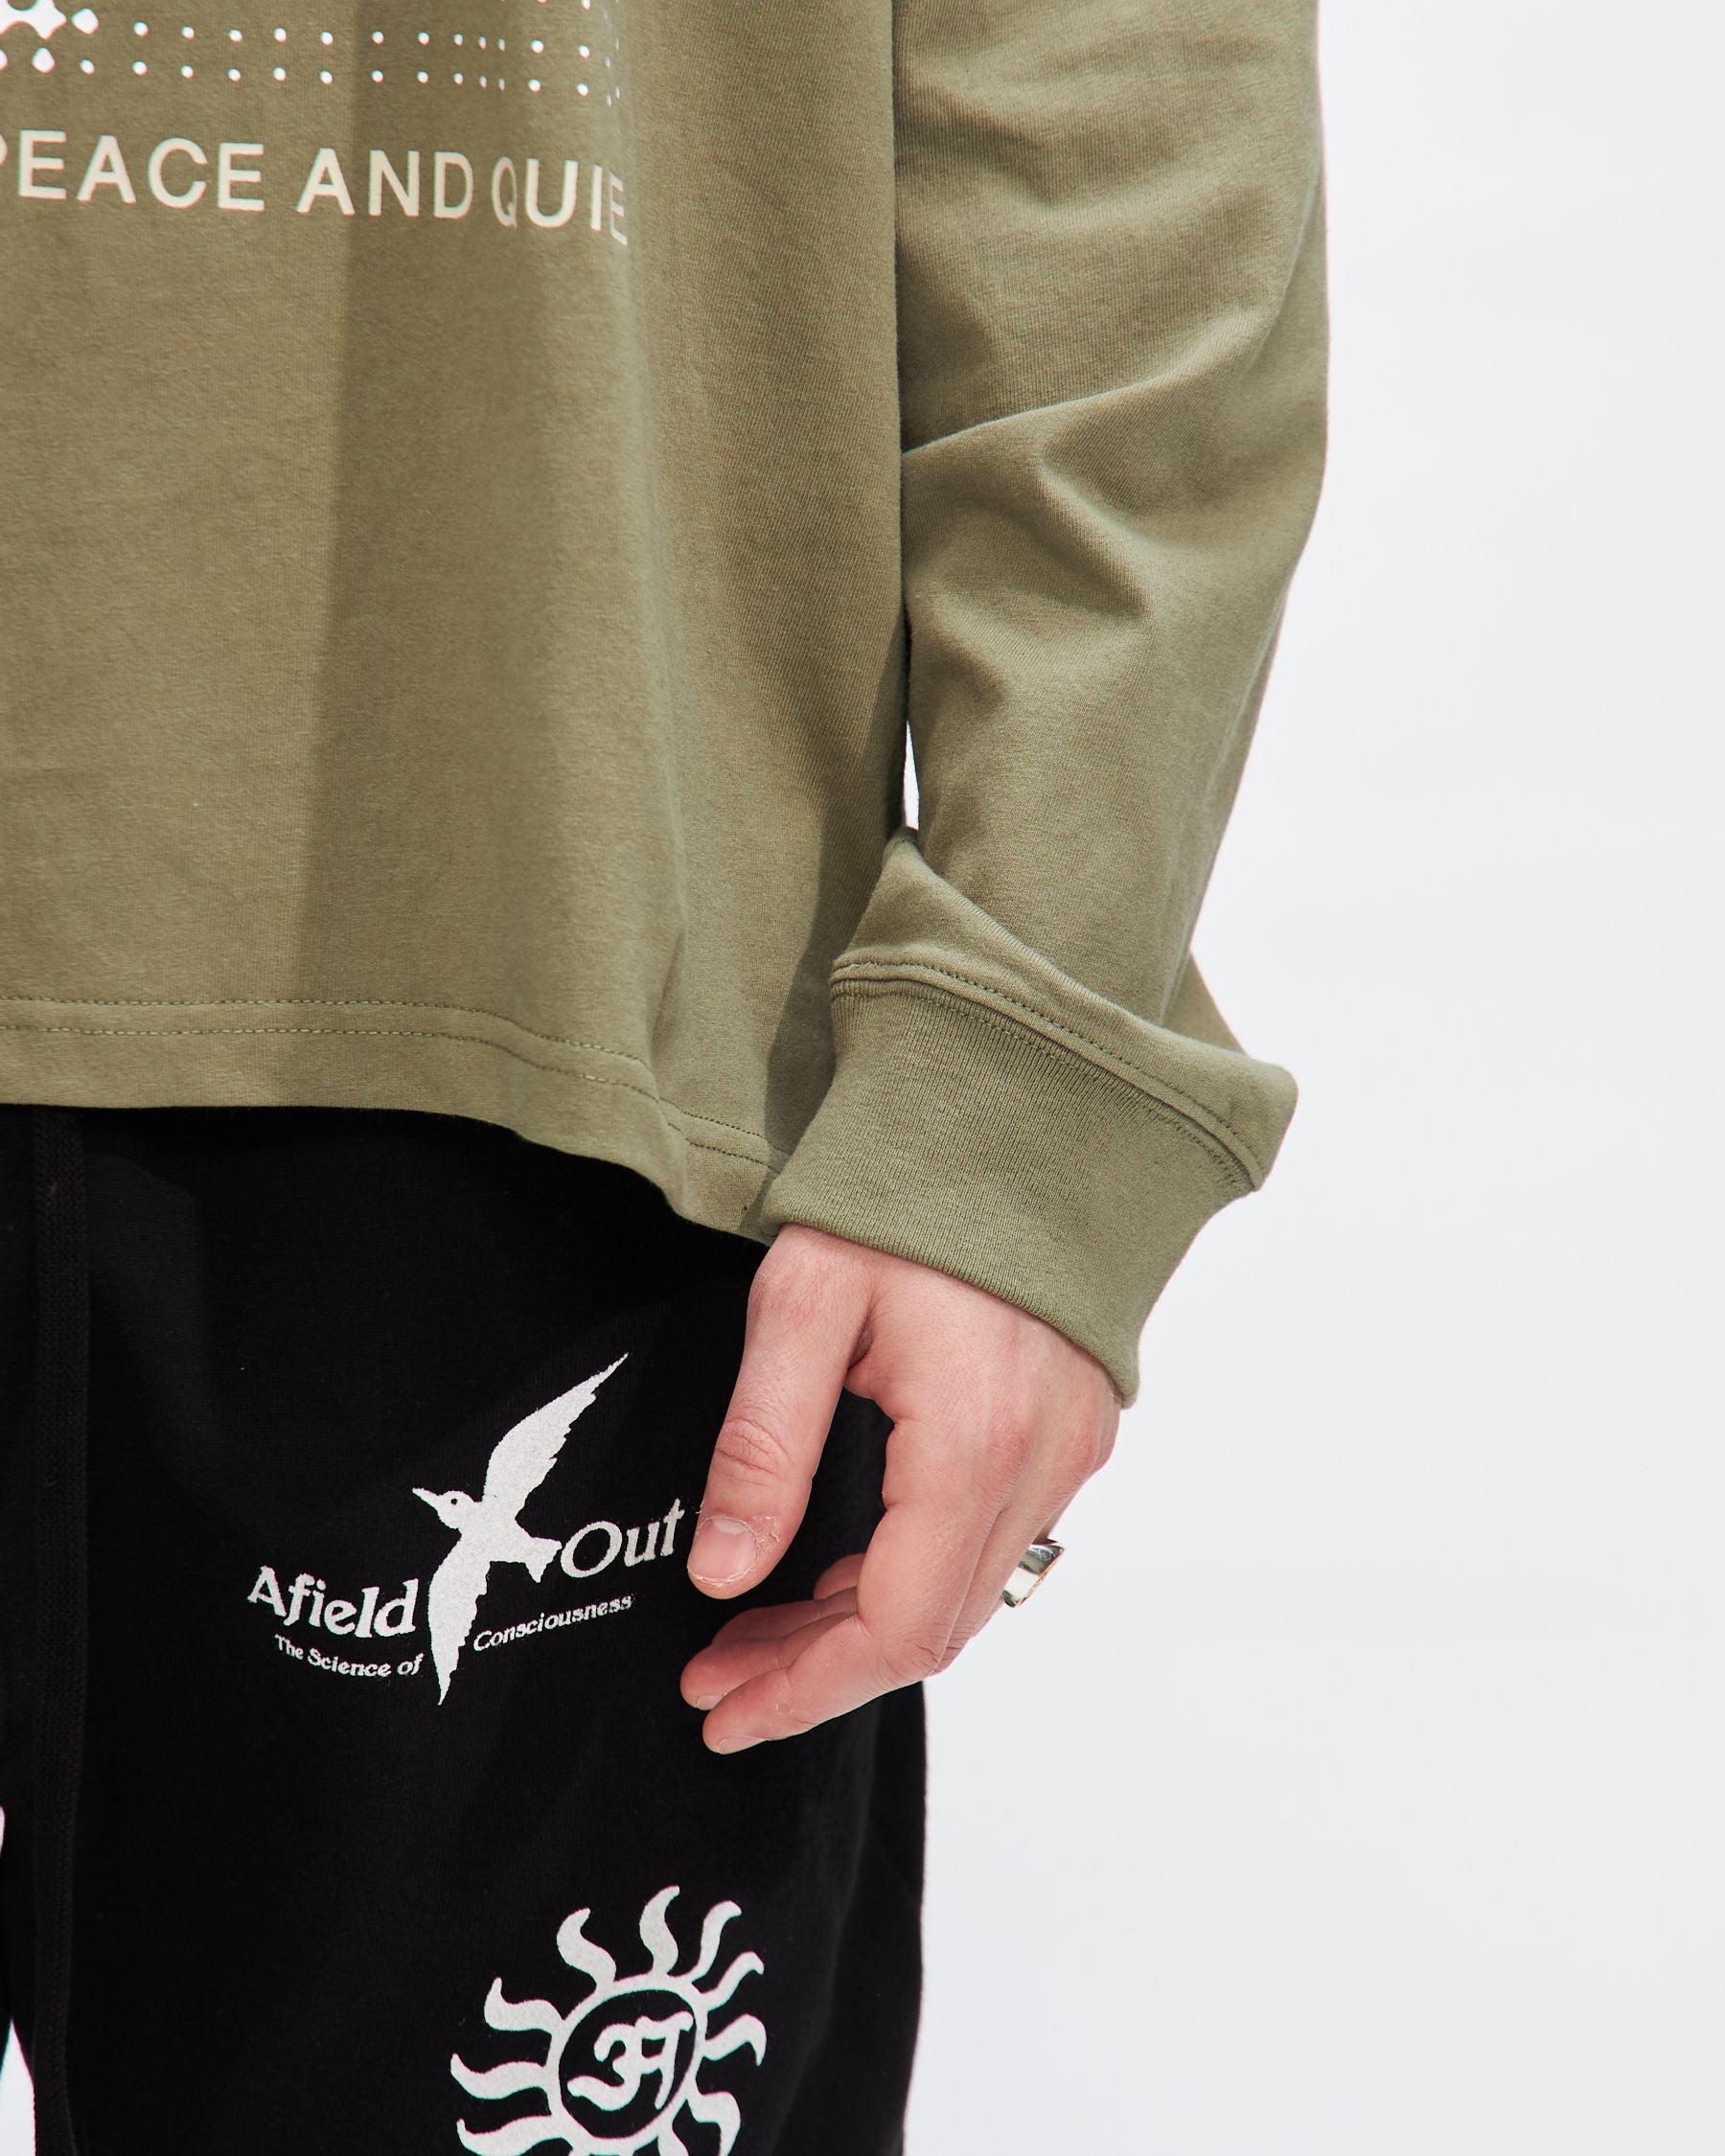 Healing Systems L/S Shirt in Olive